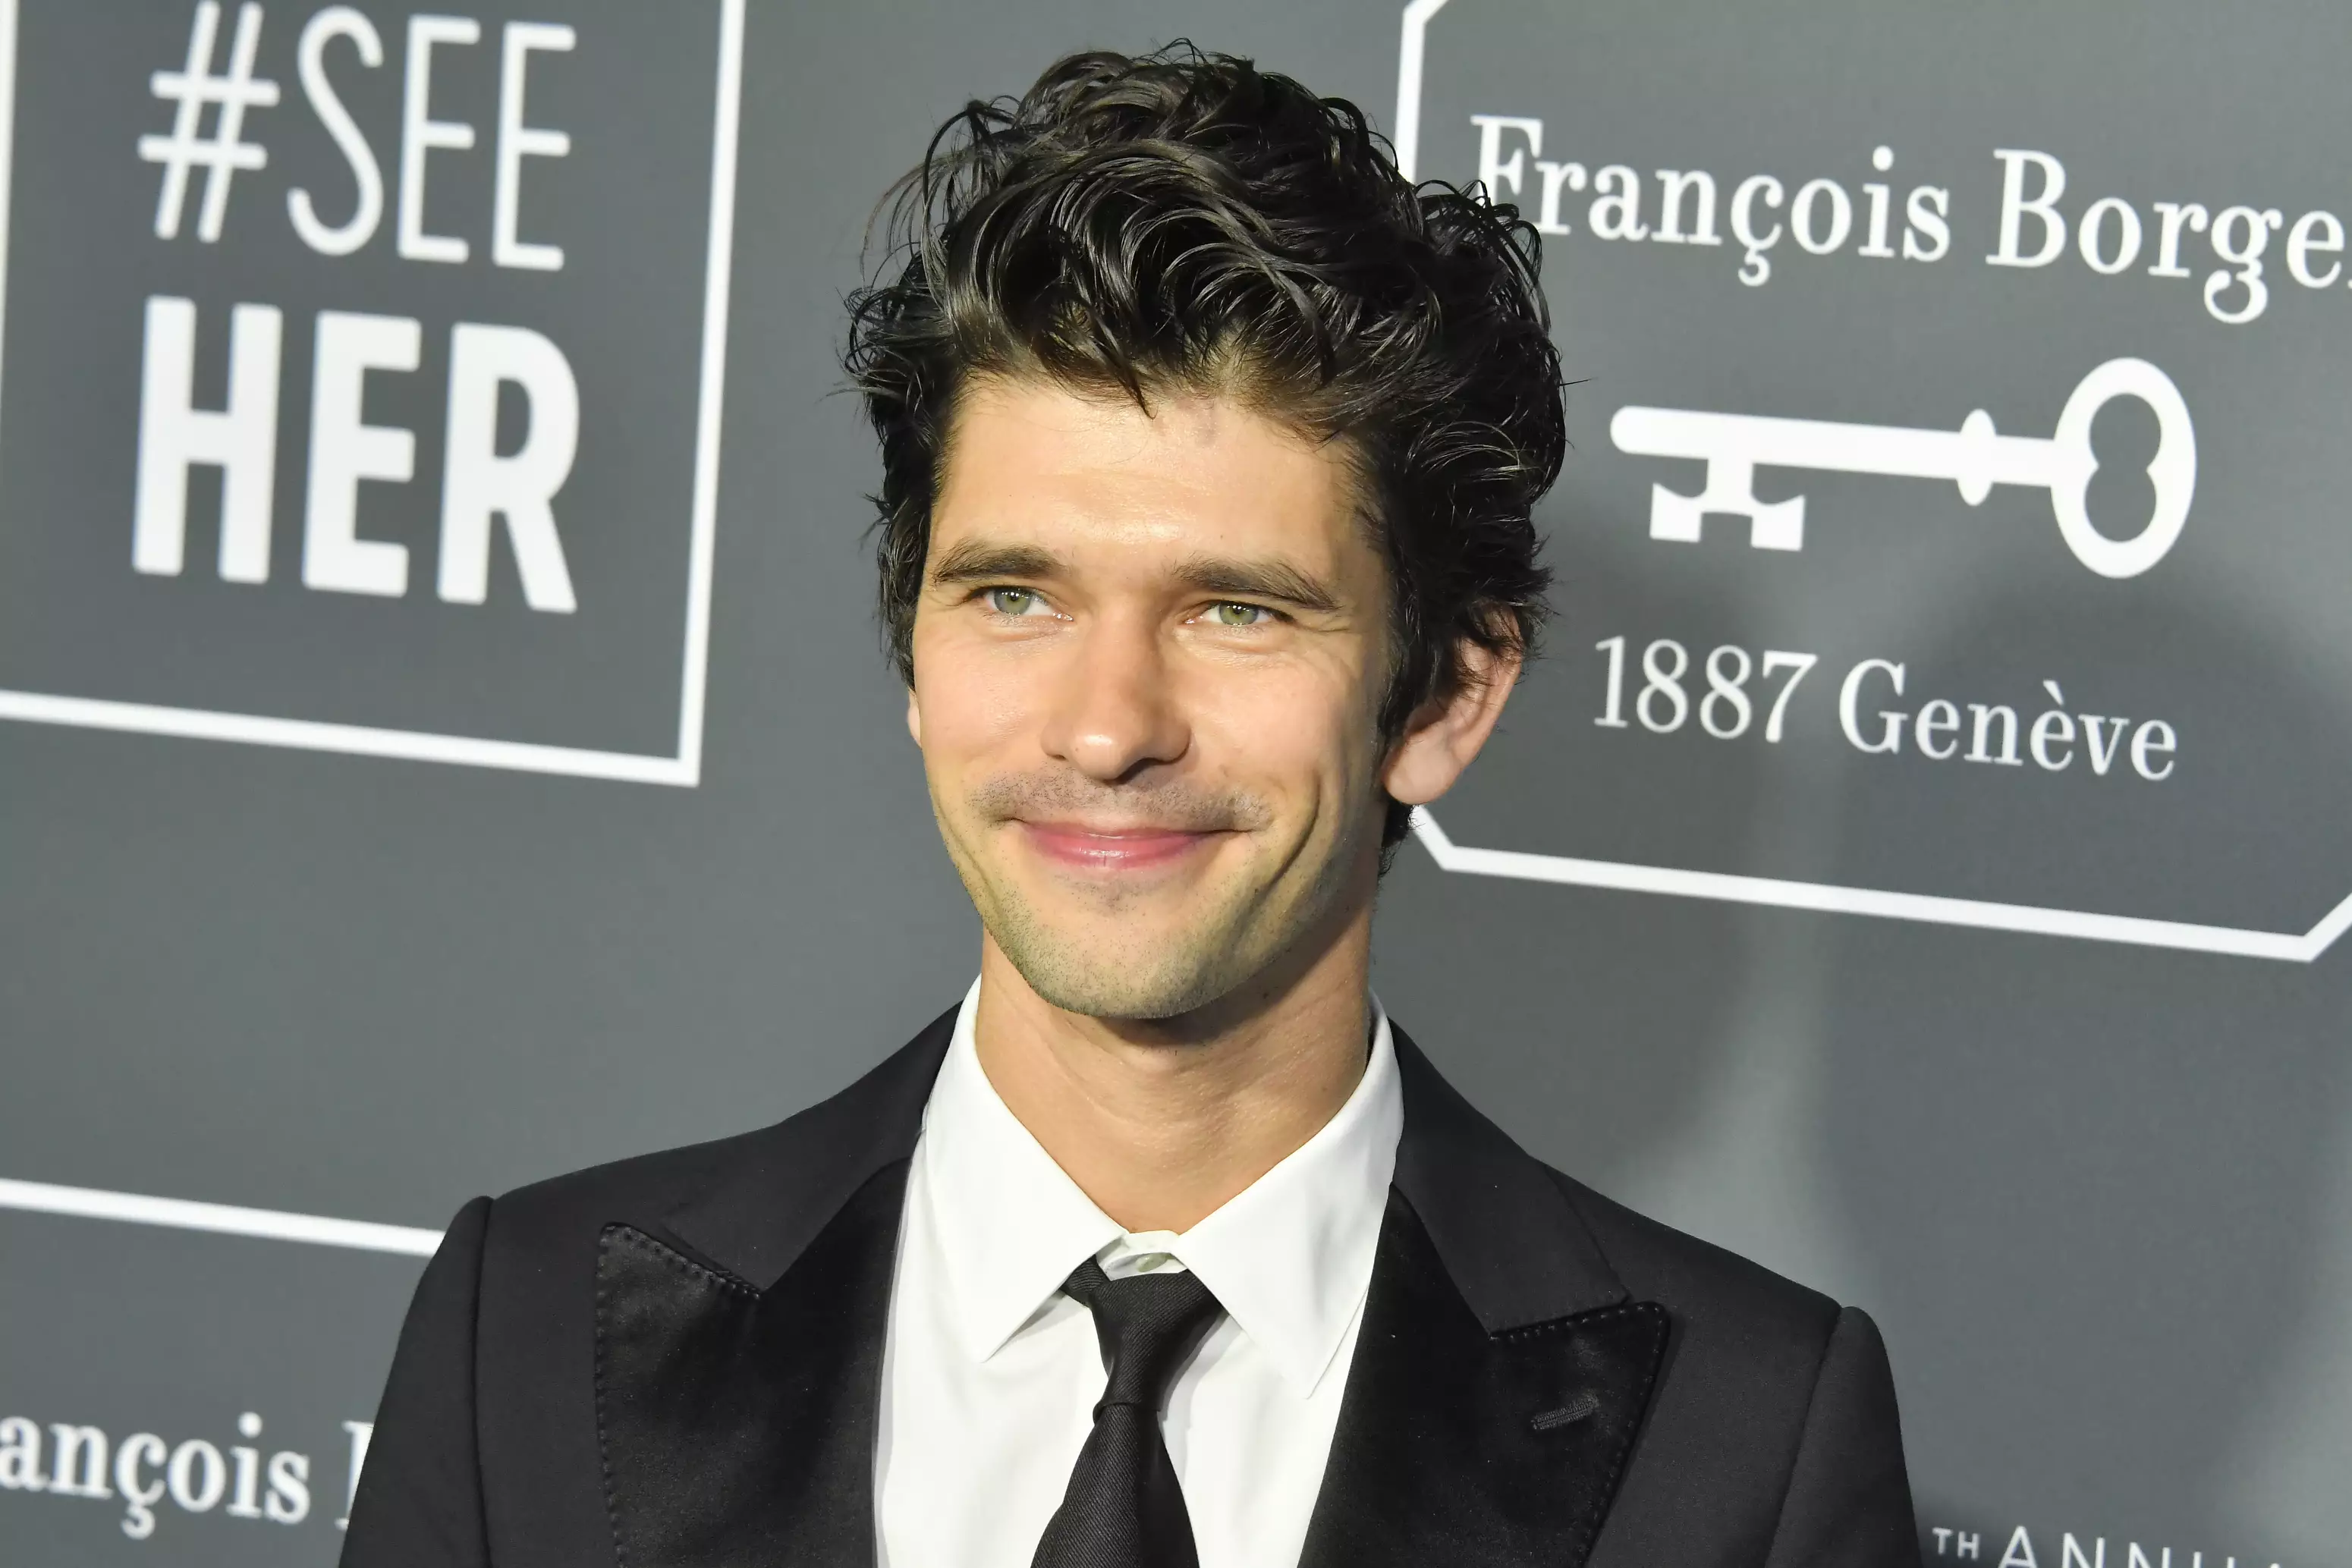 Ben Whishaw lend his voice to the character for the new TV series.